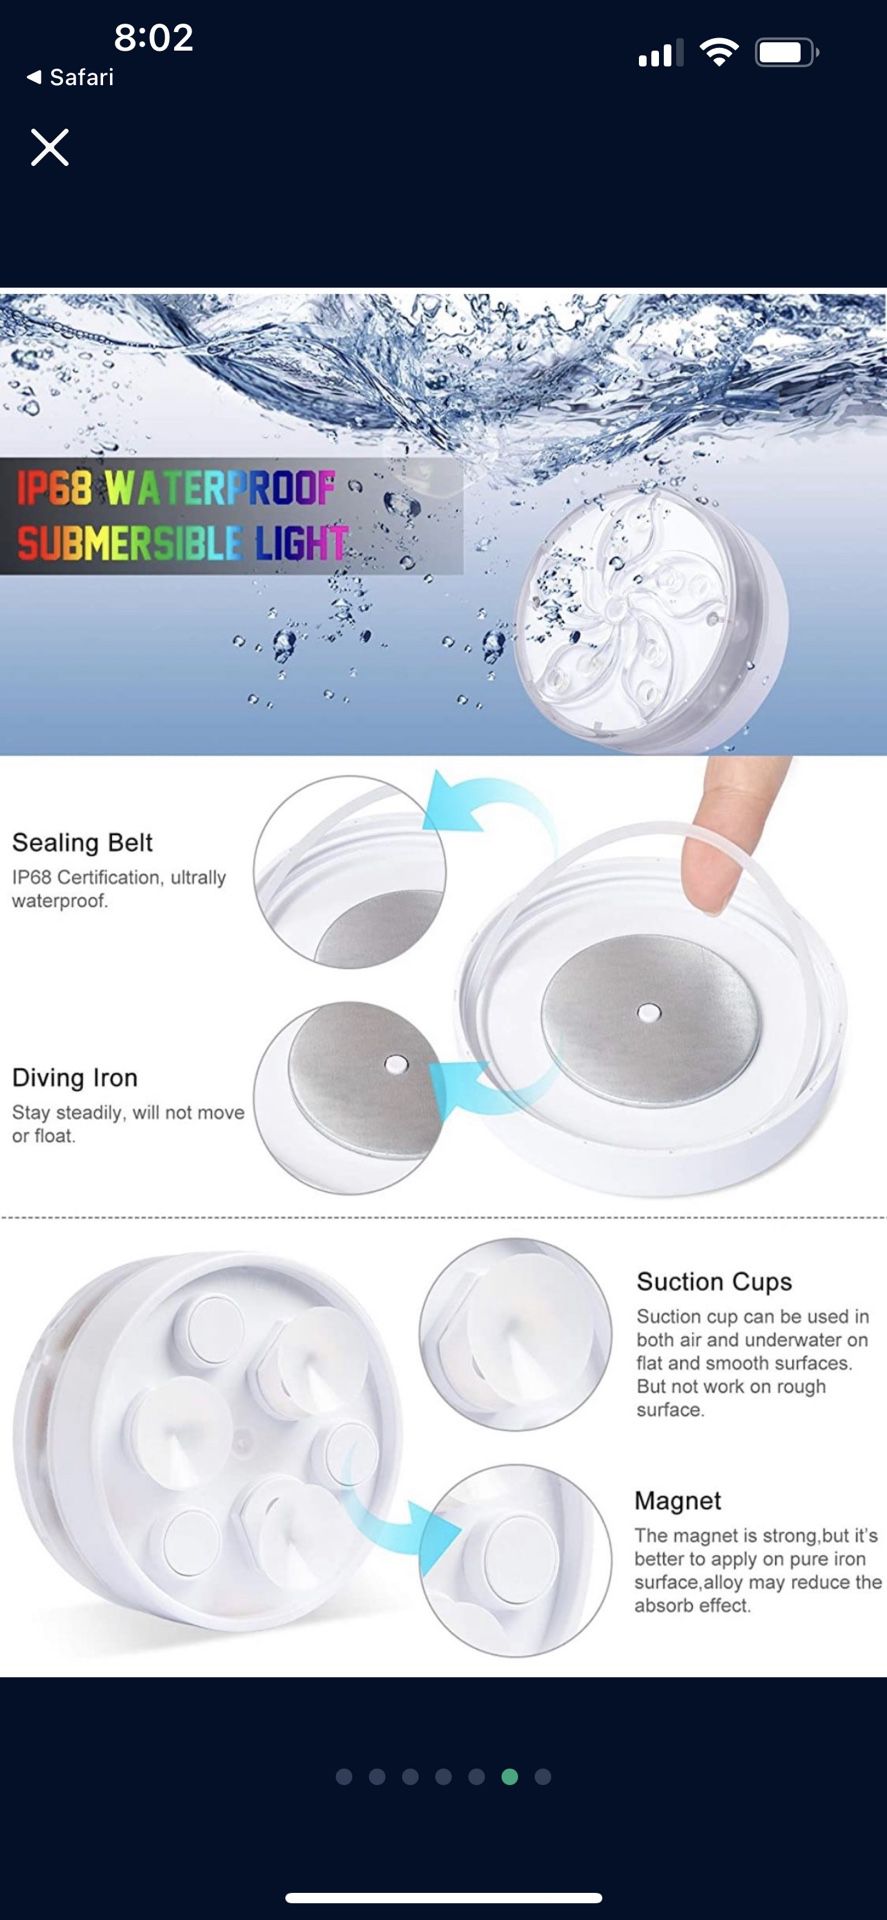 JUKI Submersible LED Pool Lights with Wireless Remote,Suction Cups & Magnets - Upgraded Waterproof Hot Tub Light for Fountain Pond Party Aquariums Vas